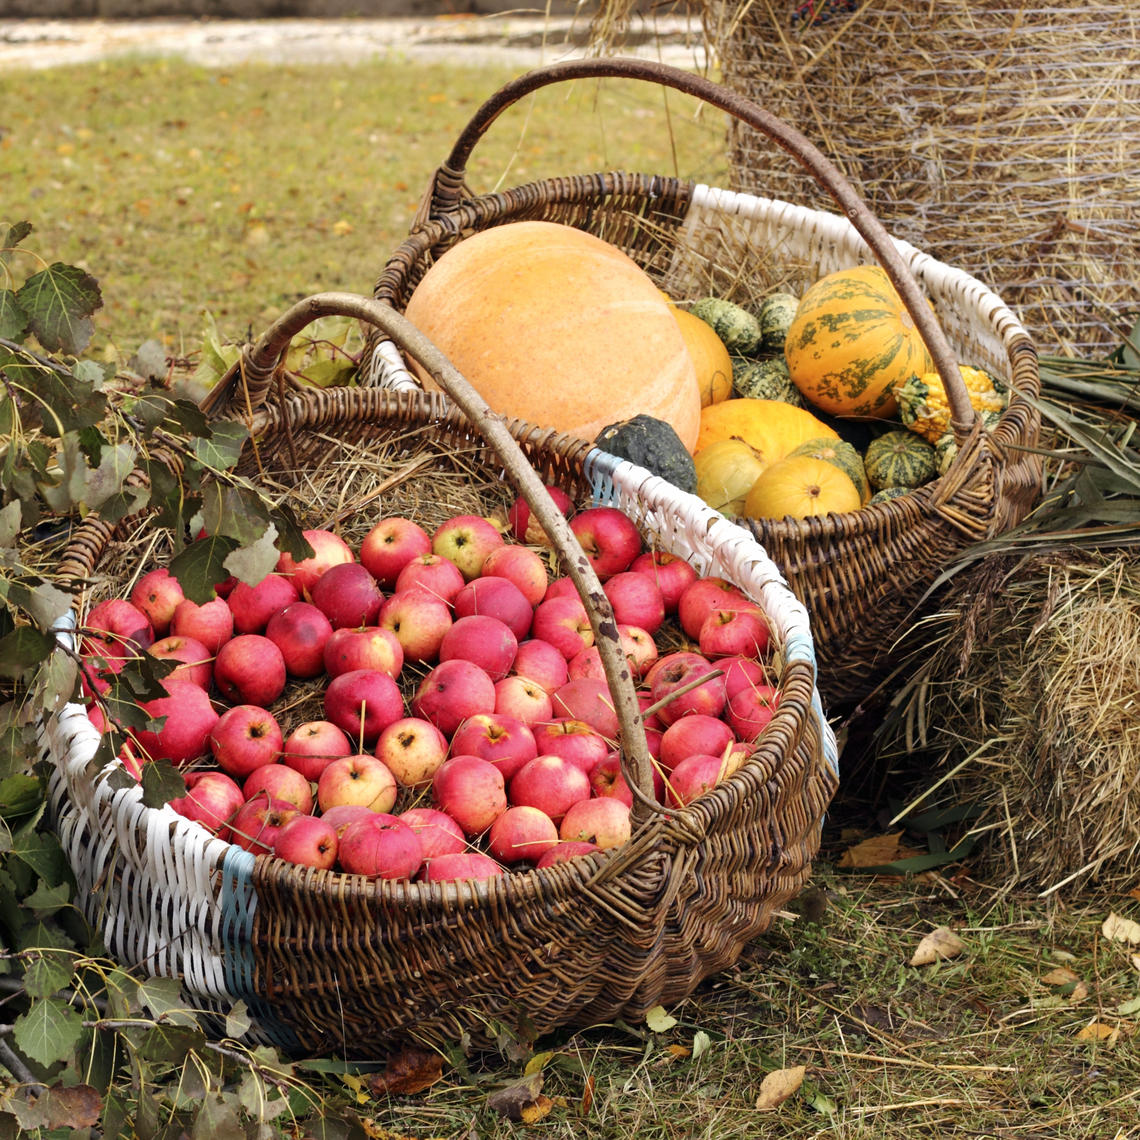 Two woven baskets, one filled with small red apples, the other with various colourful squash